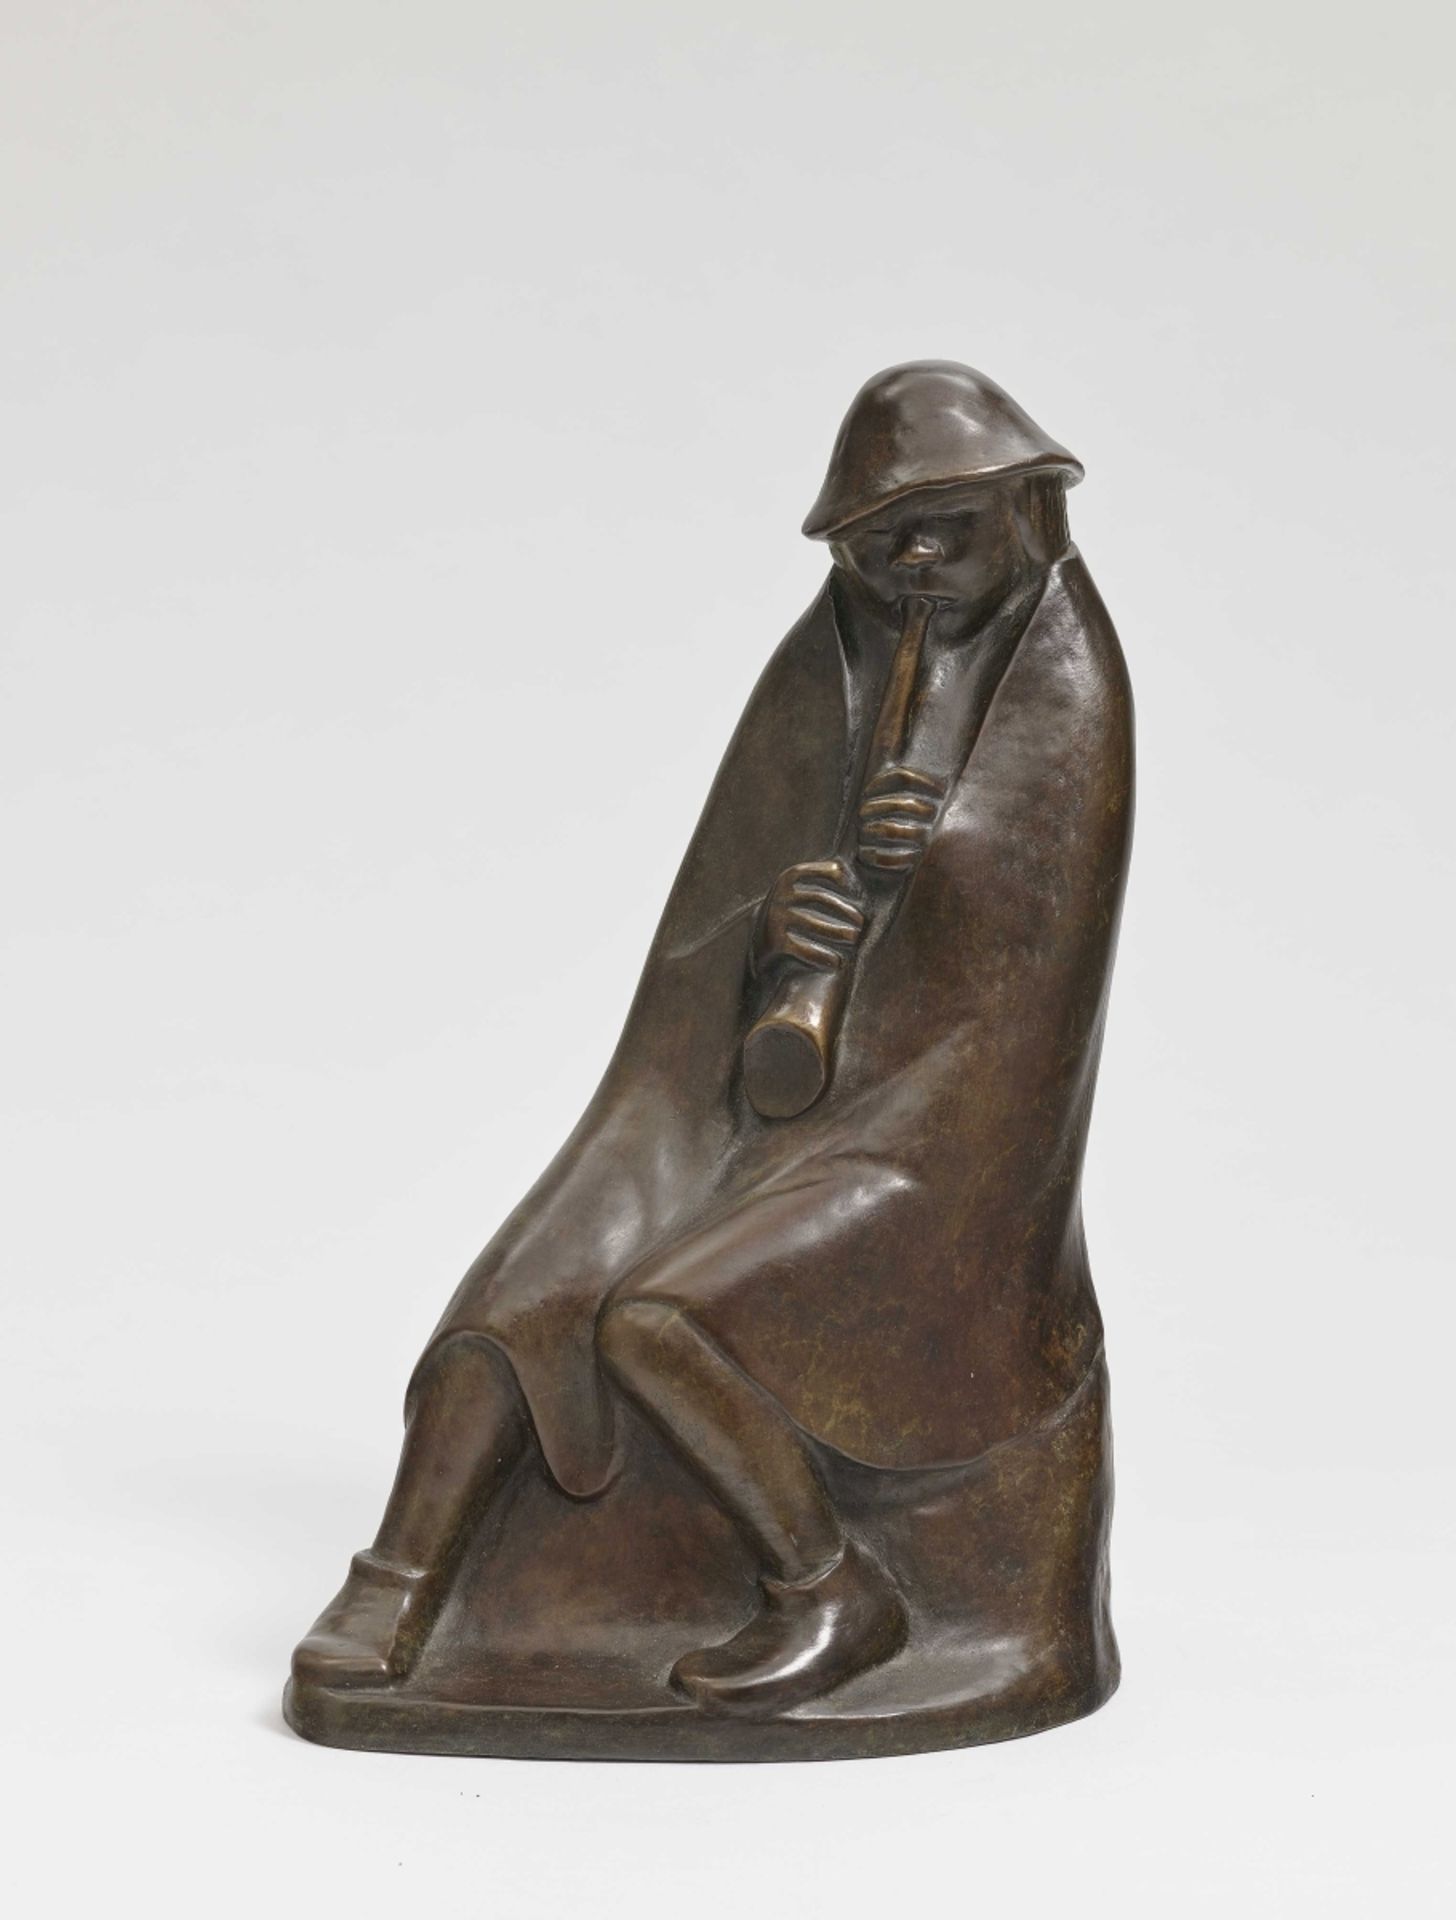 (After) Barlach, ErnstThe flute player Bronze, brown patinated Approximately 29 x 17 x 14 cm On